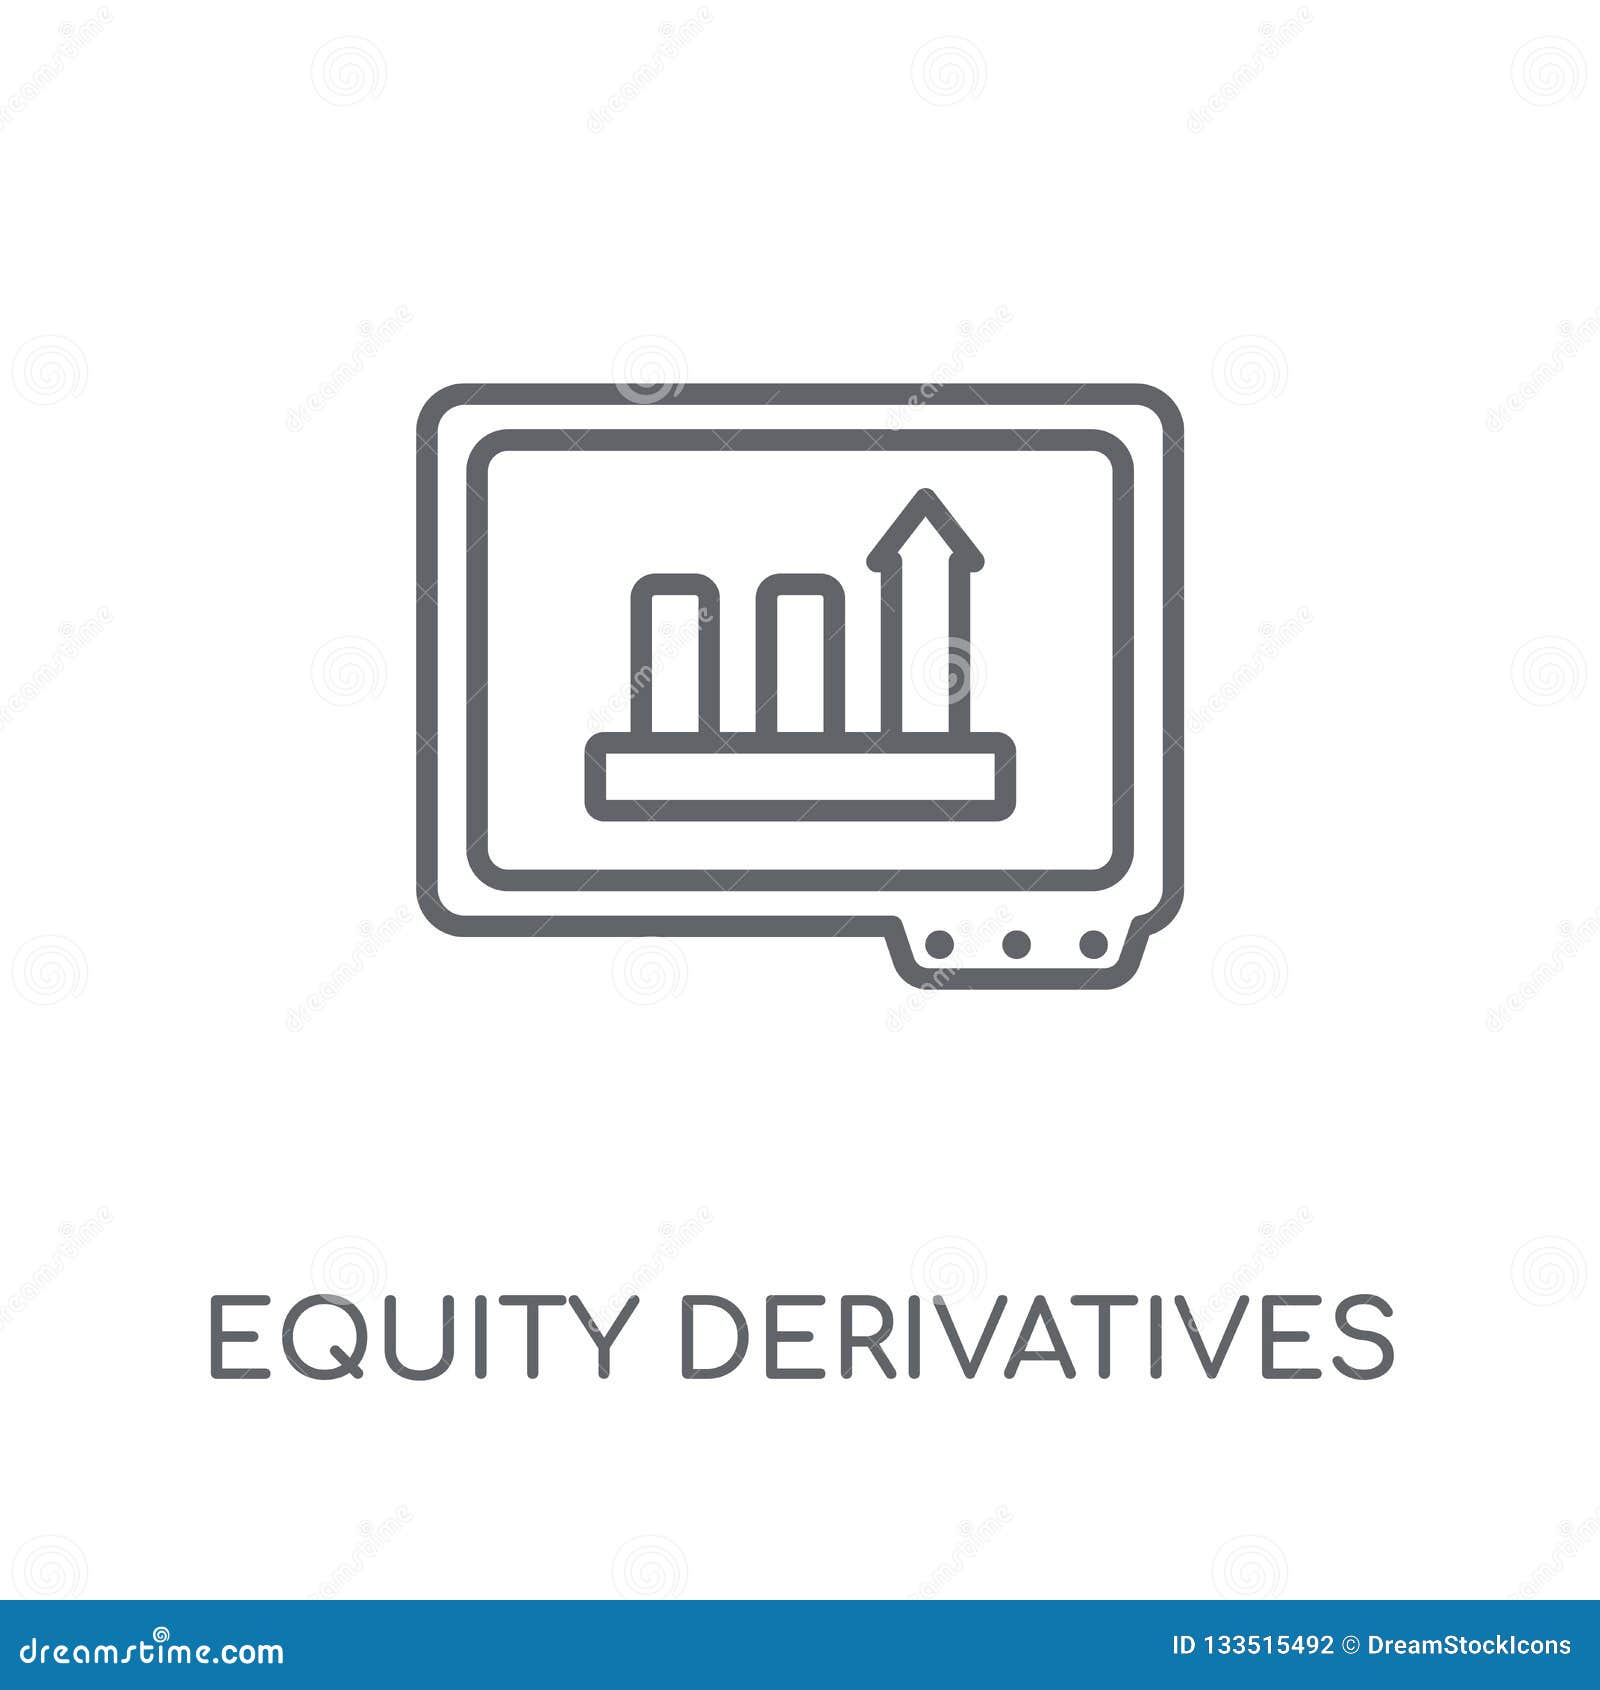 equity derivatives linear icon. modern outline equity derivative